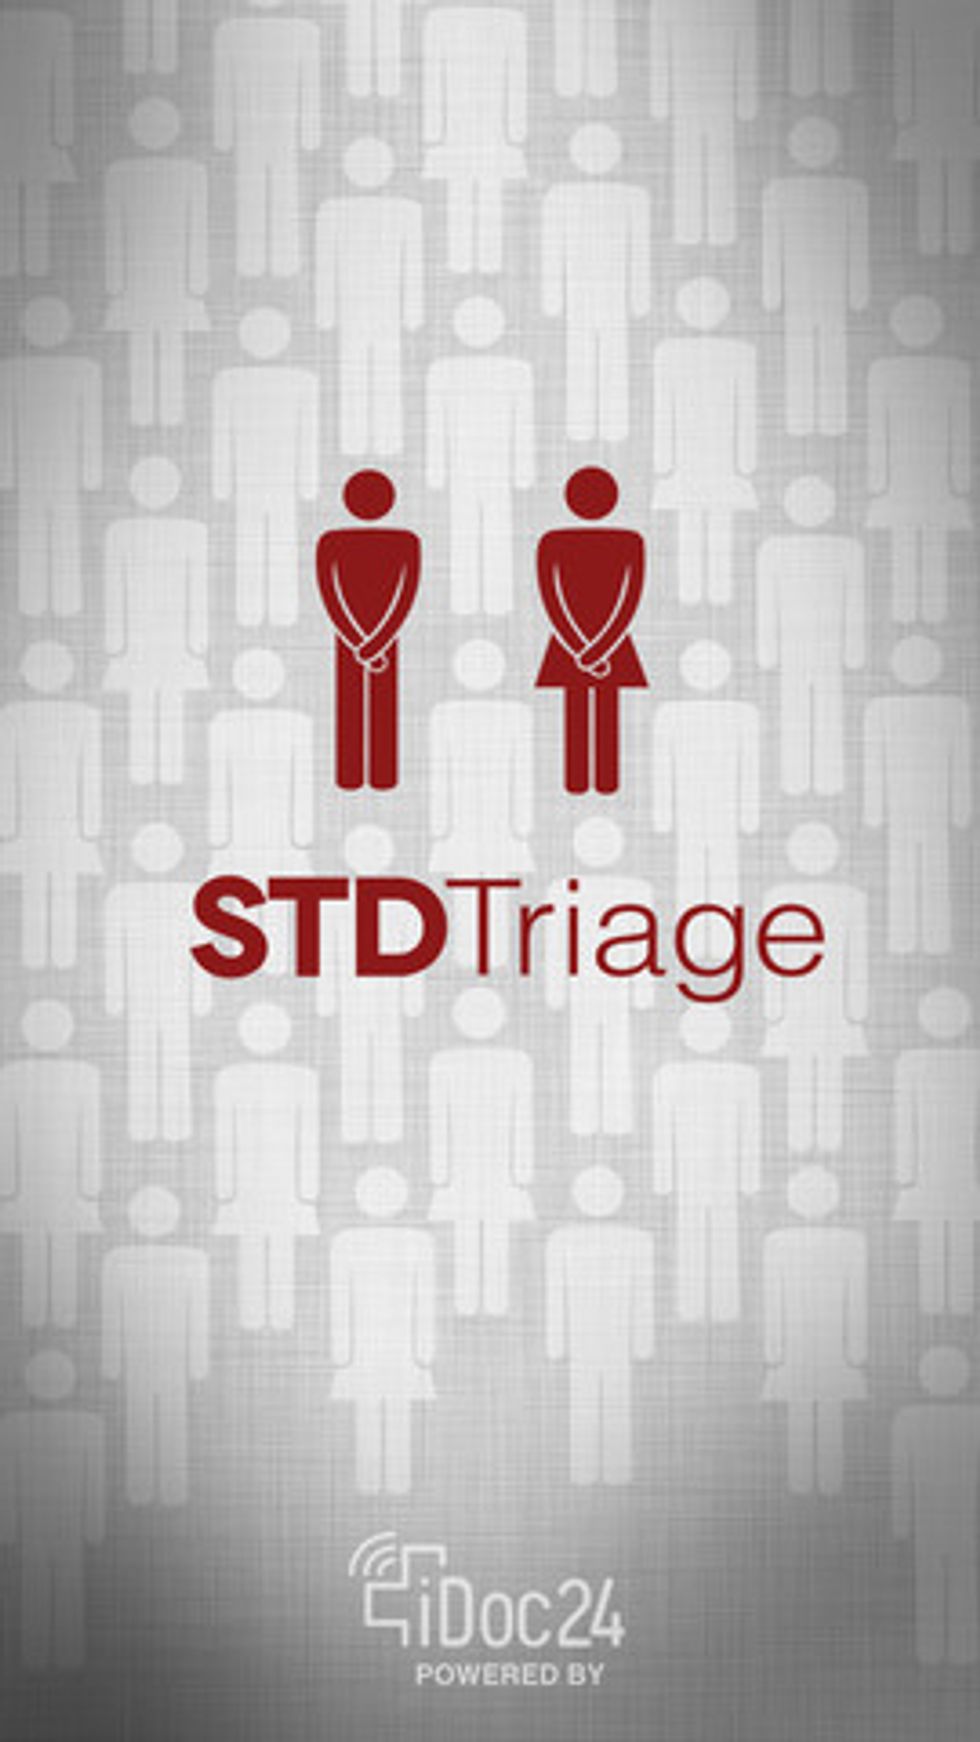 STD Triage: The First App to Help People Identify STDs, Anonymously